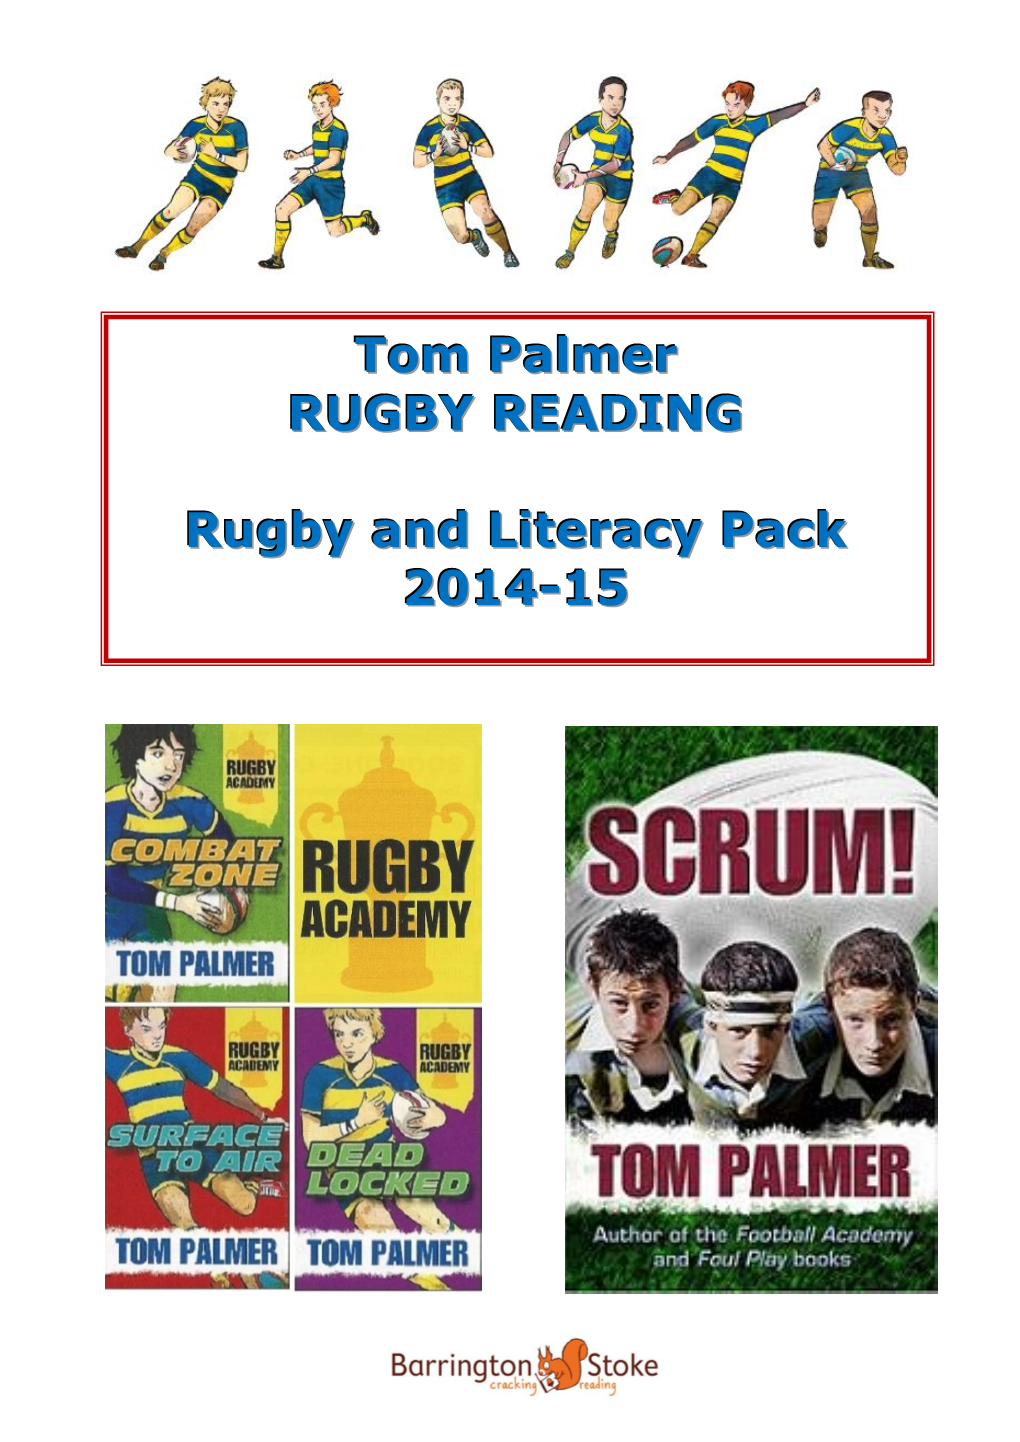 Tom Palmer RUGBY READING Rugby and Literacy Pack 2014-15